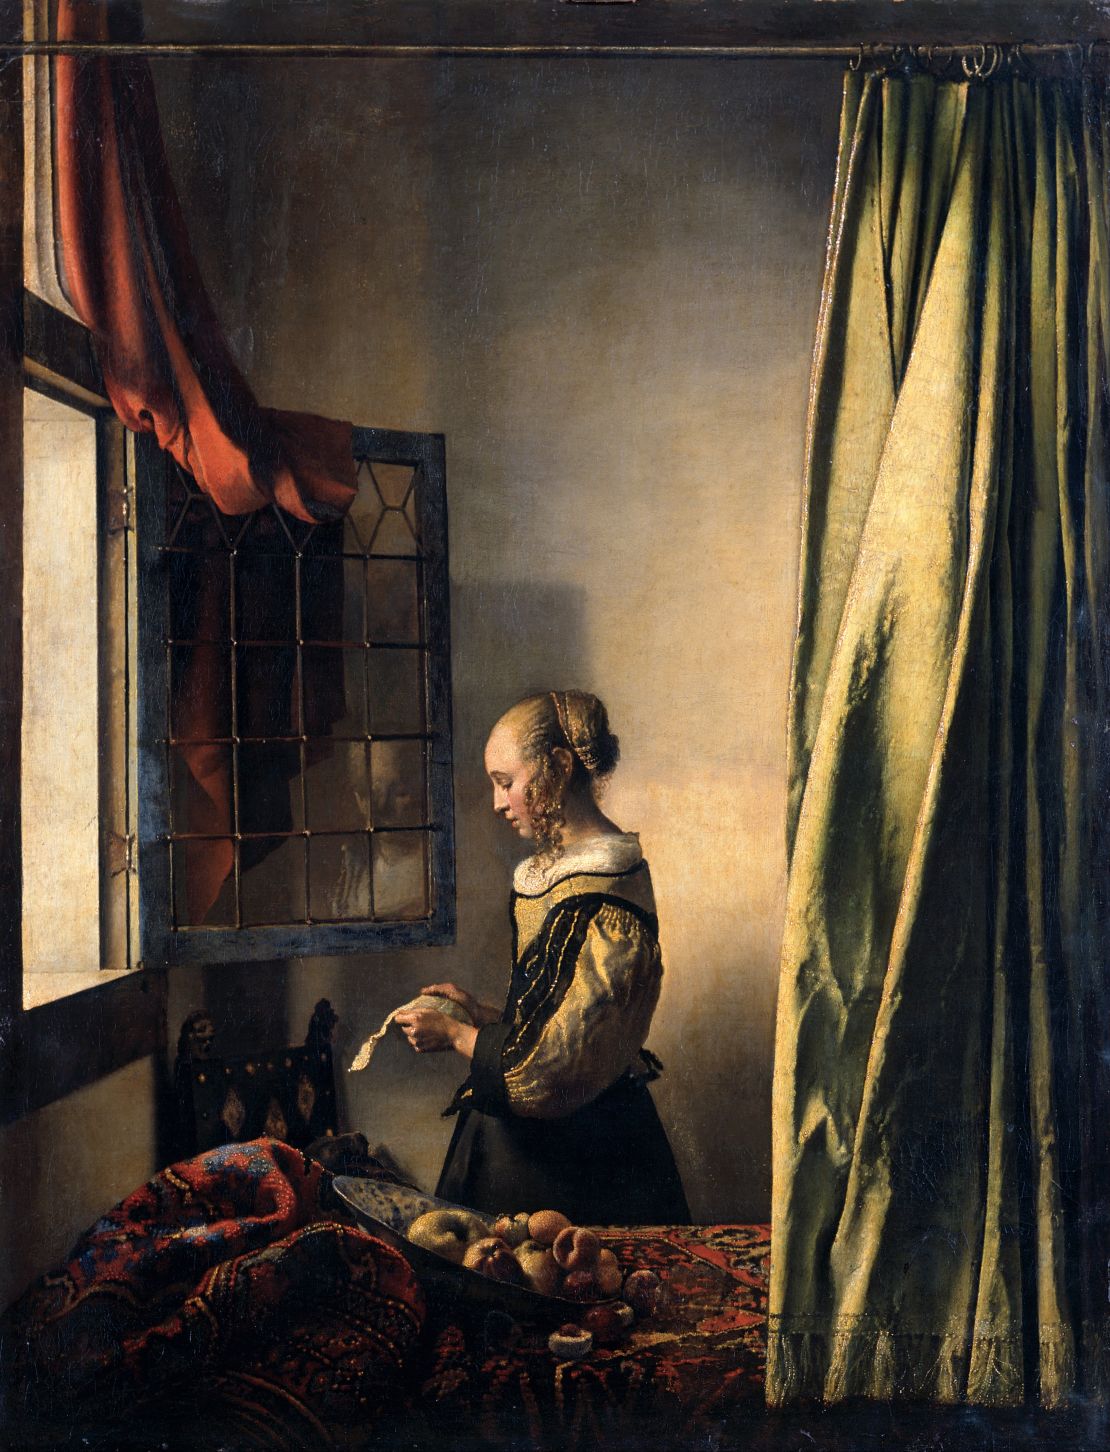 Vermeer's "A Girl Reading a Letter at an open window" (1657)